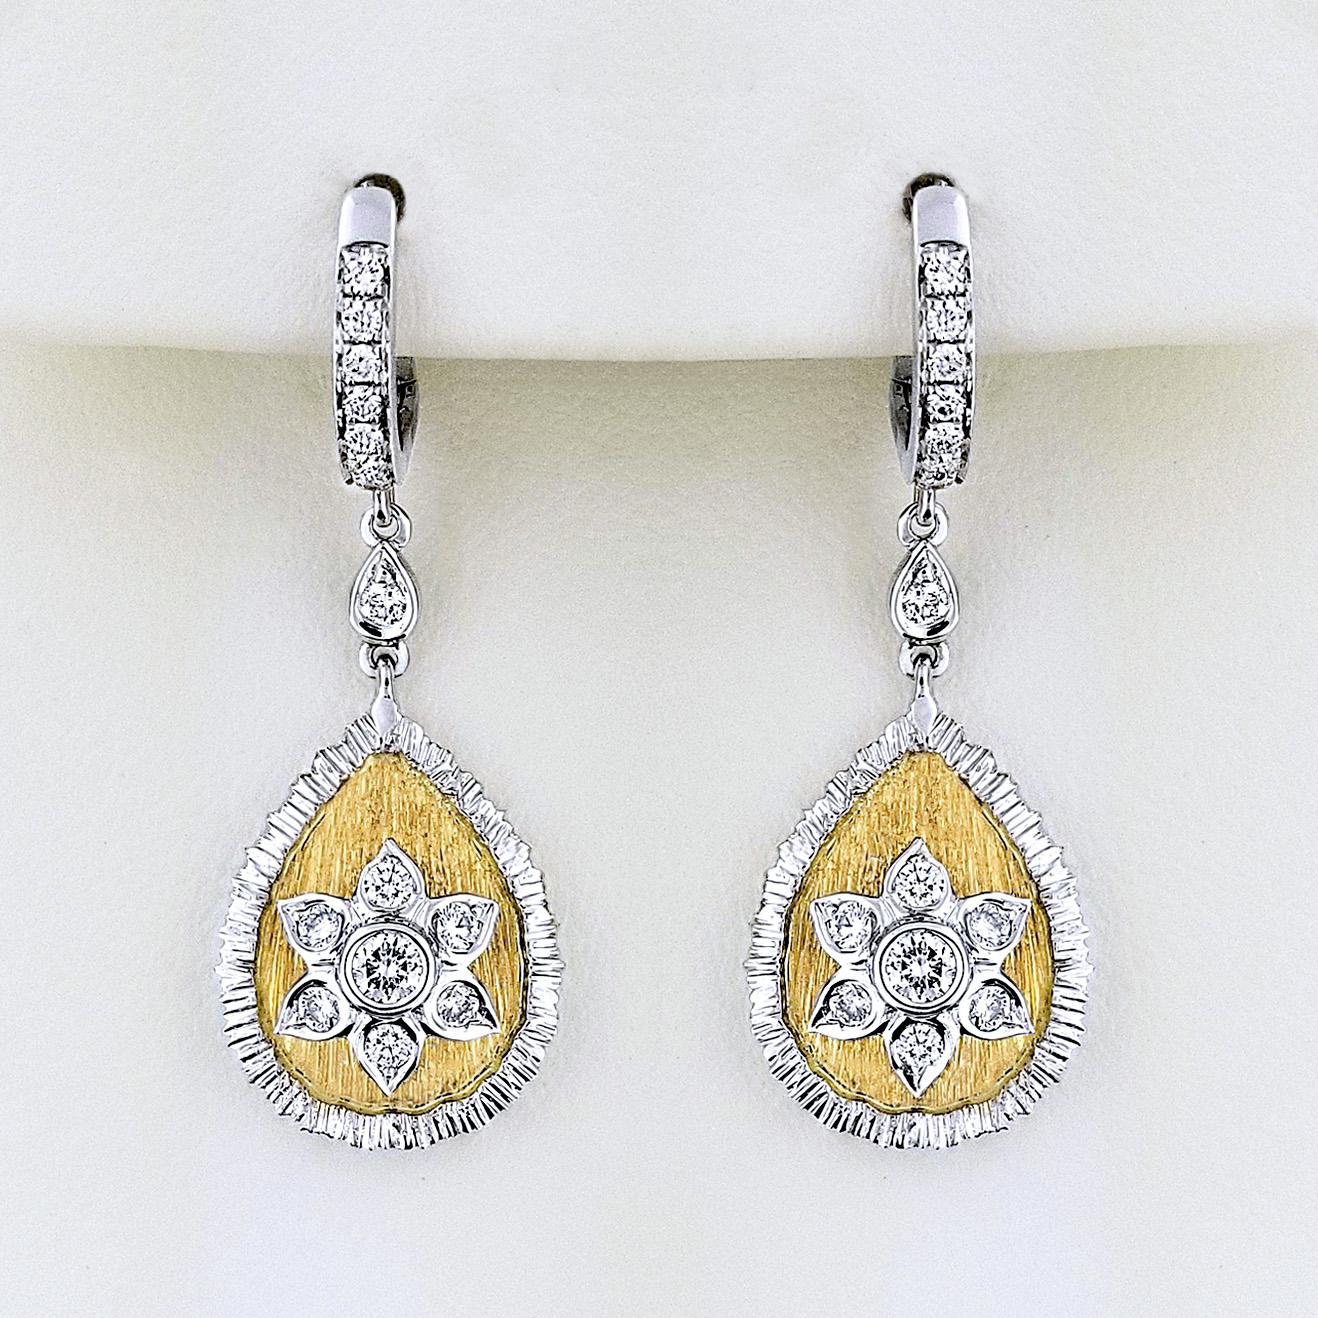 Produced by award winning Italian designer Stefano Vitolo. Stefano creates custom artisanal one of a kind jewelry with excellent gemstones in a truly old world Italian craftmanship.
These handcrafted earring have 0.45 total carat weight of F/G